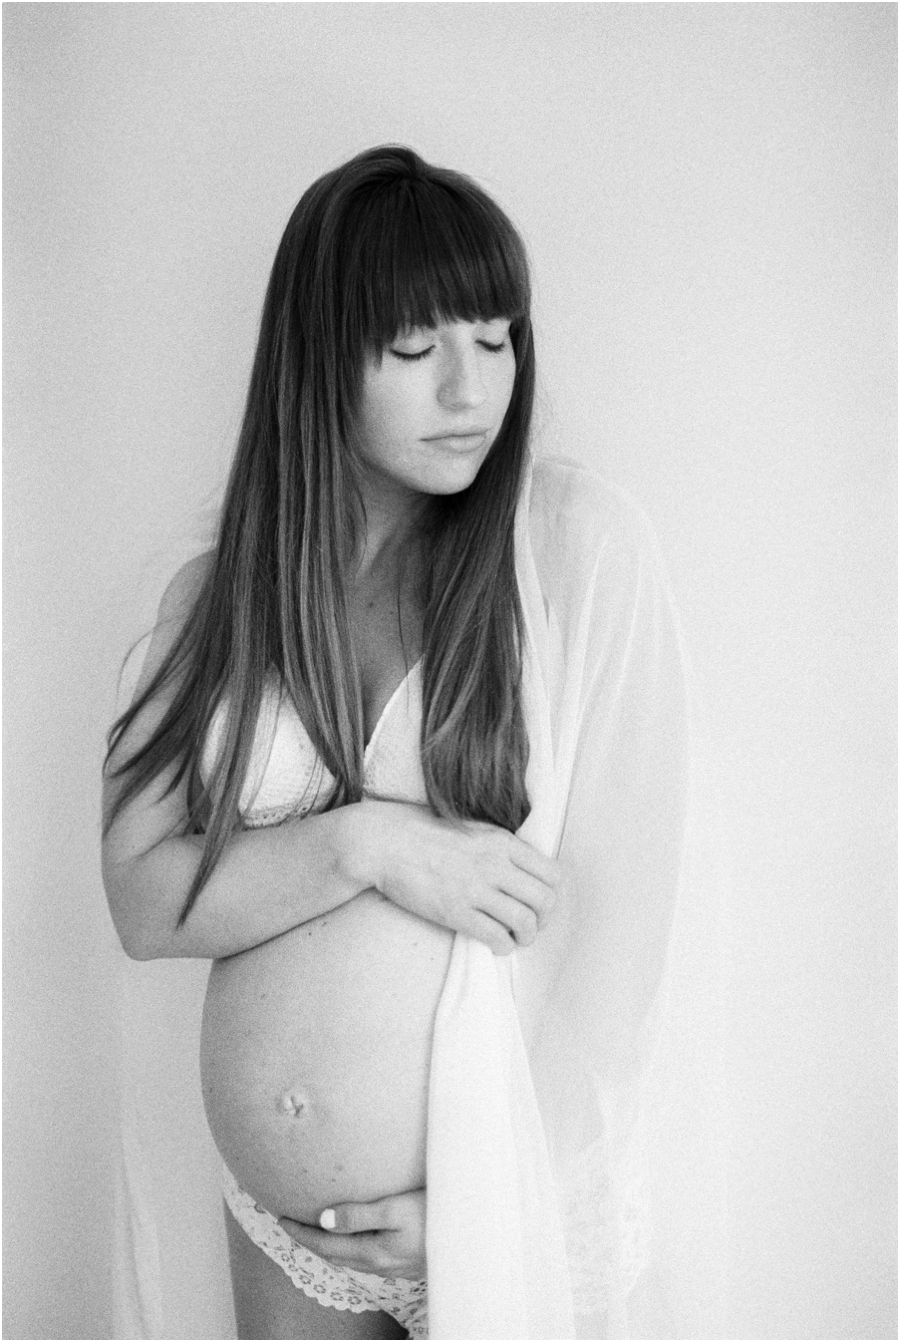 Intimate Maternity Session by Film Photographer Hillary Muelleck